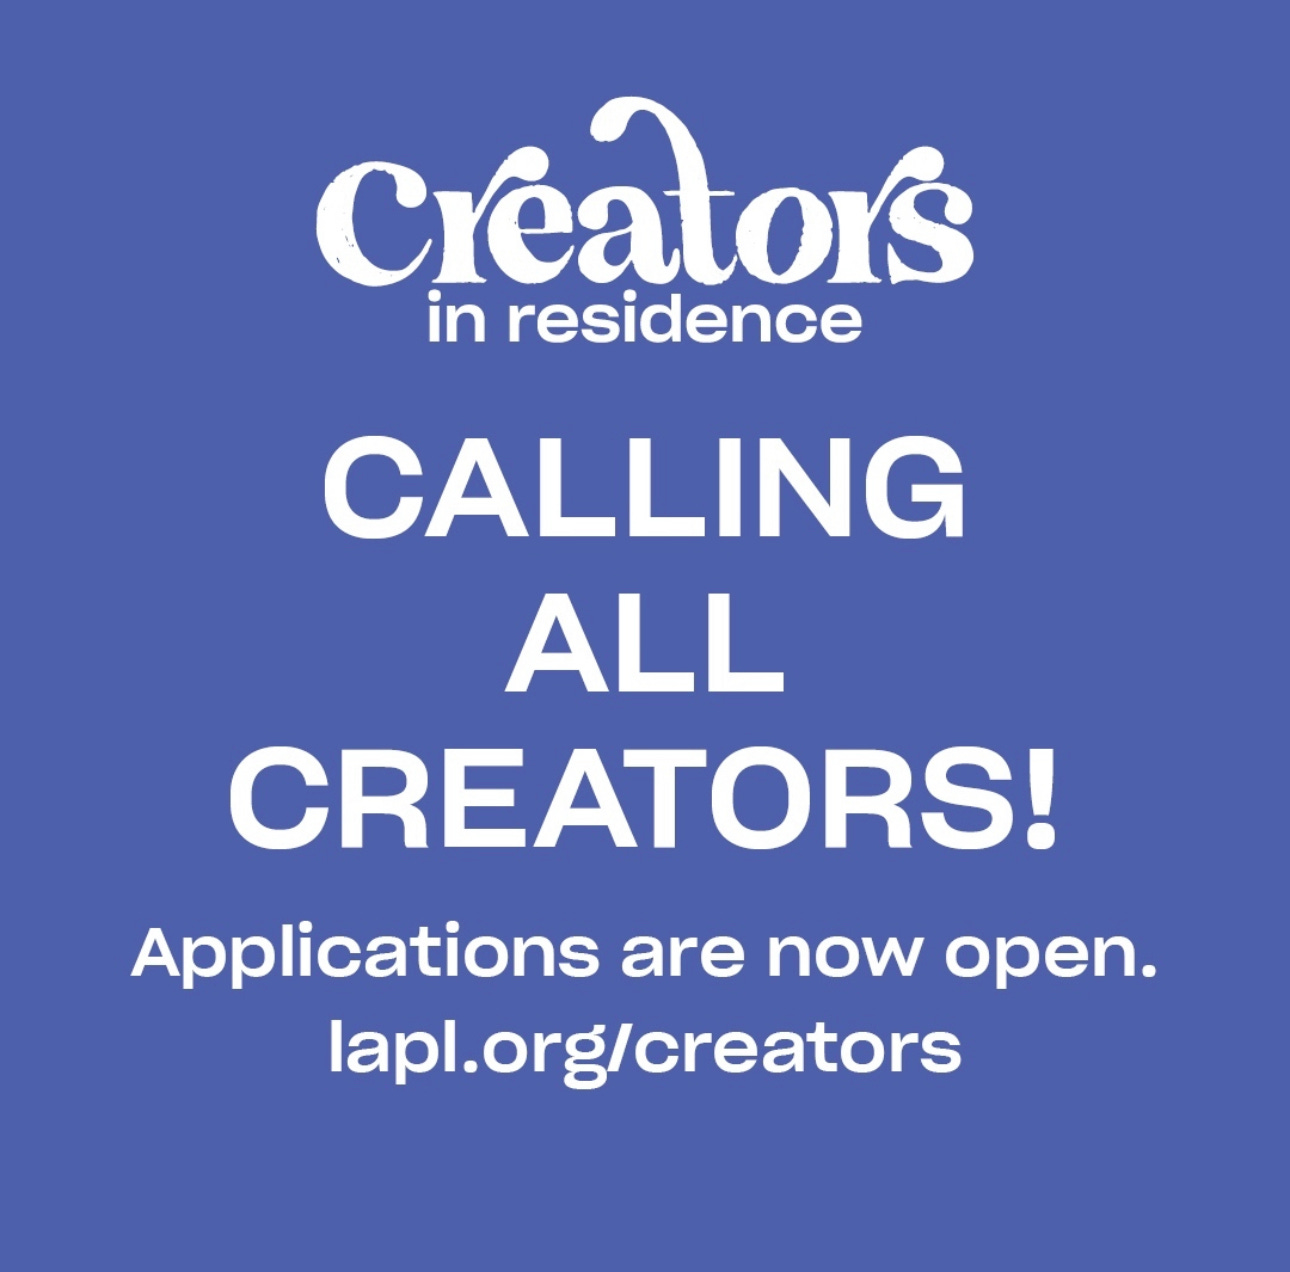 The Los Angeles Public Library announces the first ever open call for creative Angelenos to apply for the LAPL Creators in Residence program